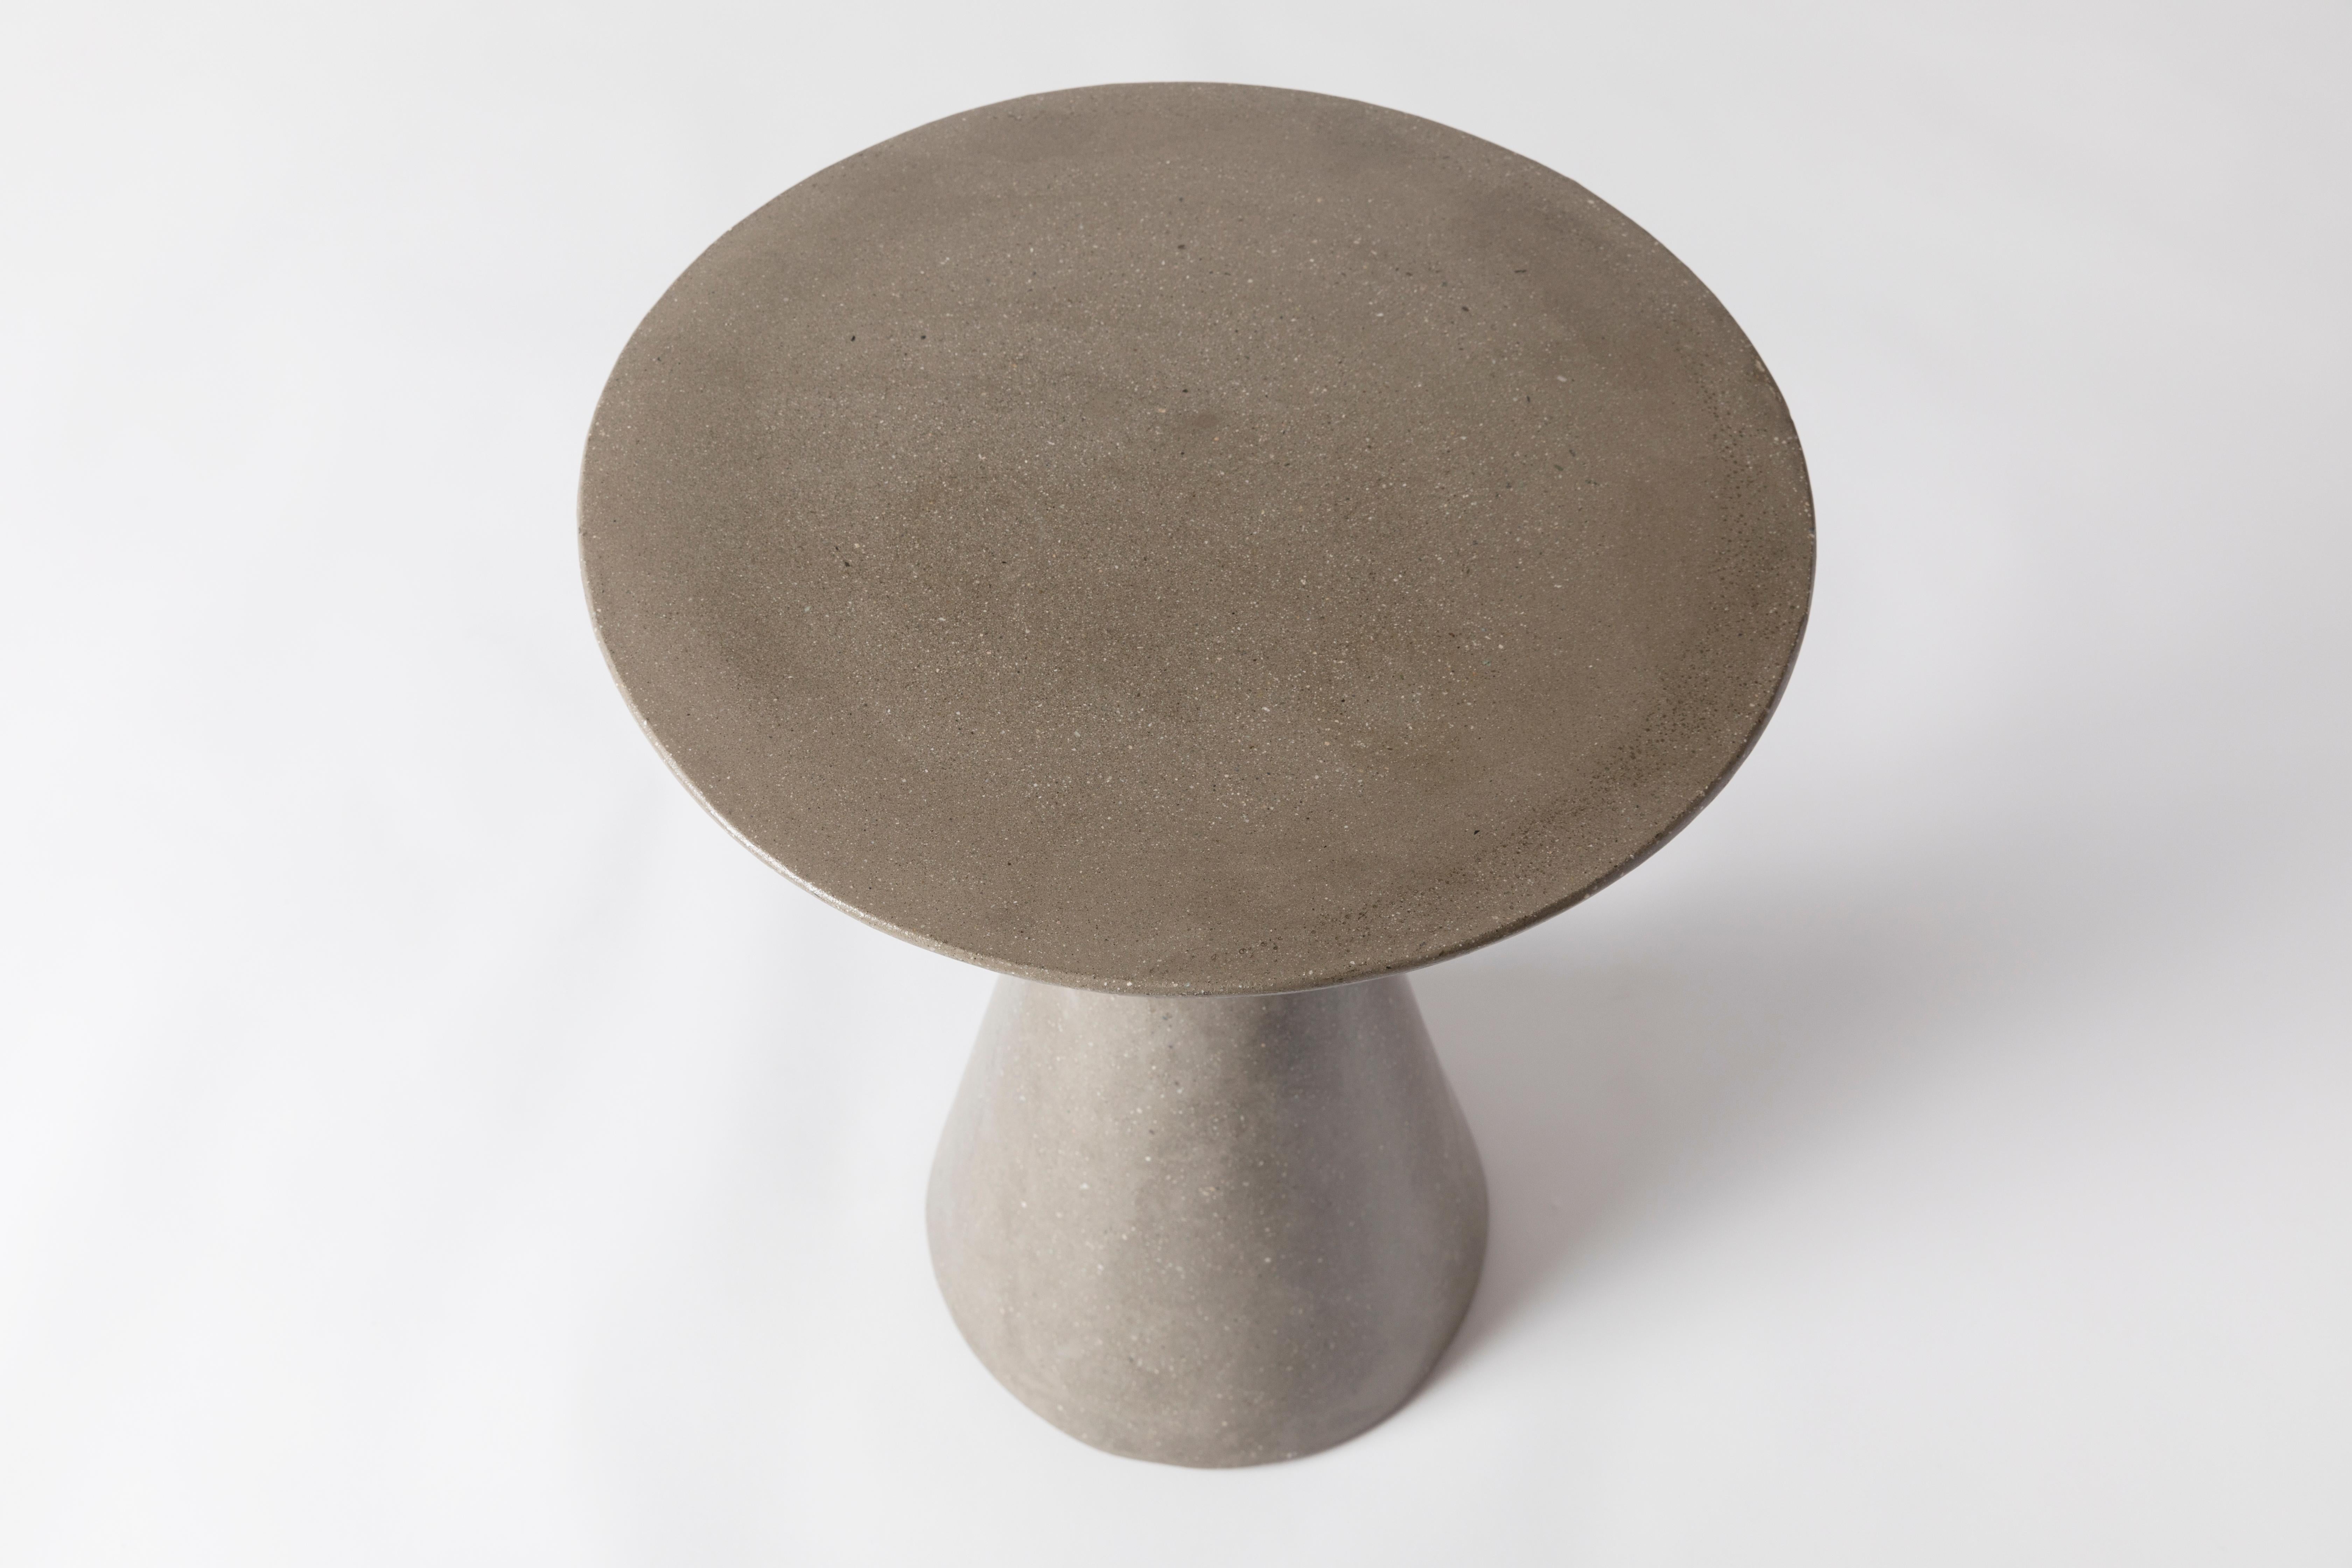 American James de Wulf Concrete Round Side Table, Standard Colors For Sale